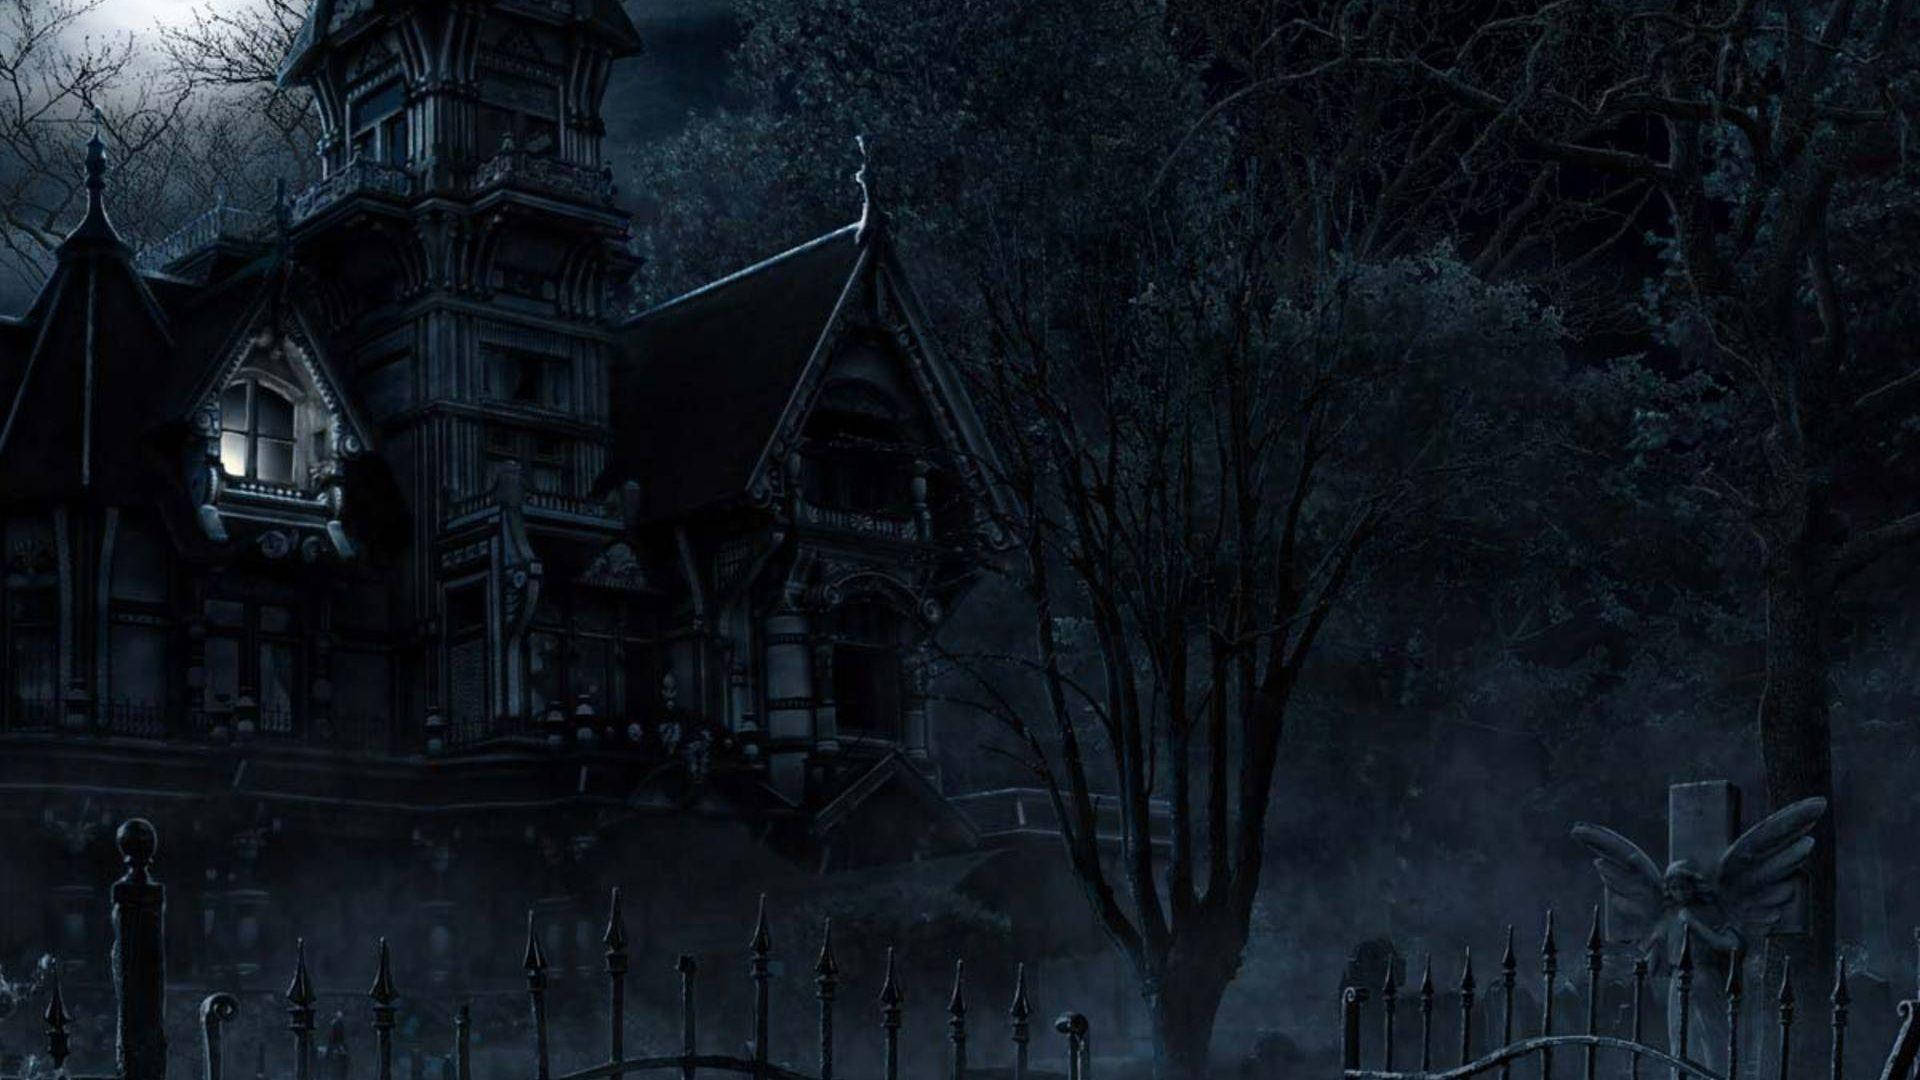 "A spooky, deserted Haunted House on Halloween night!" Wallpaper